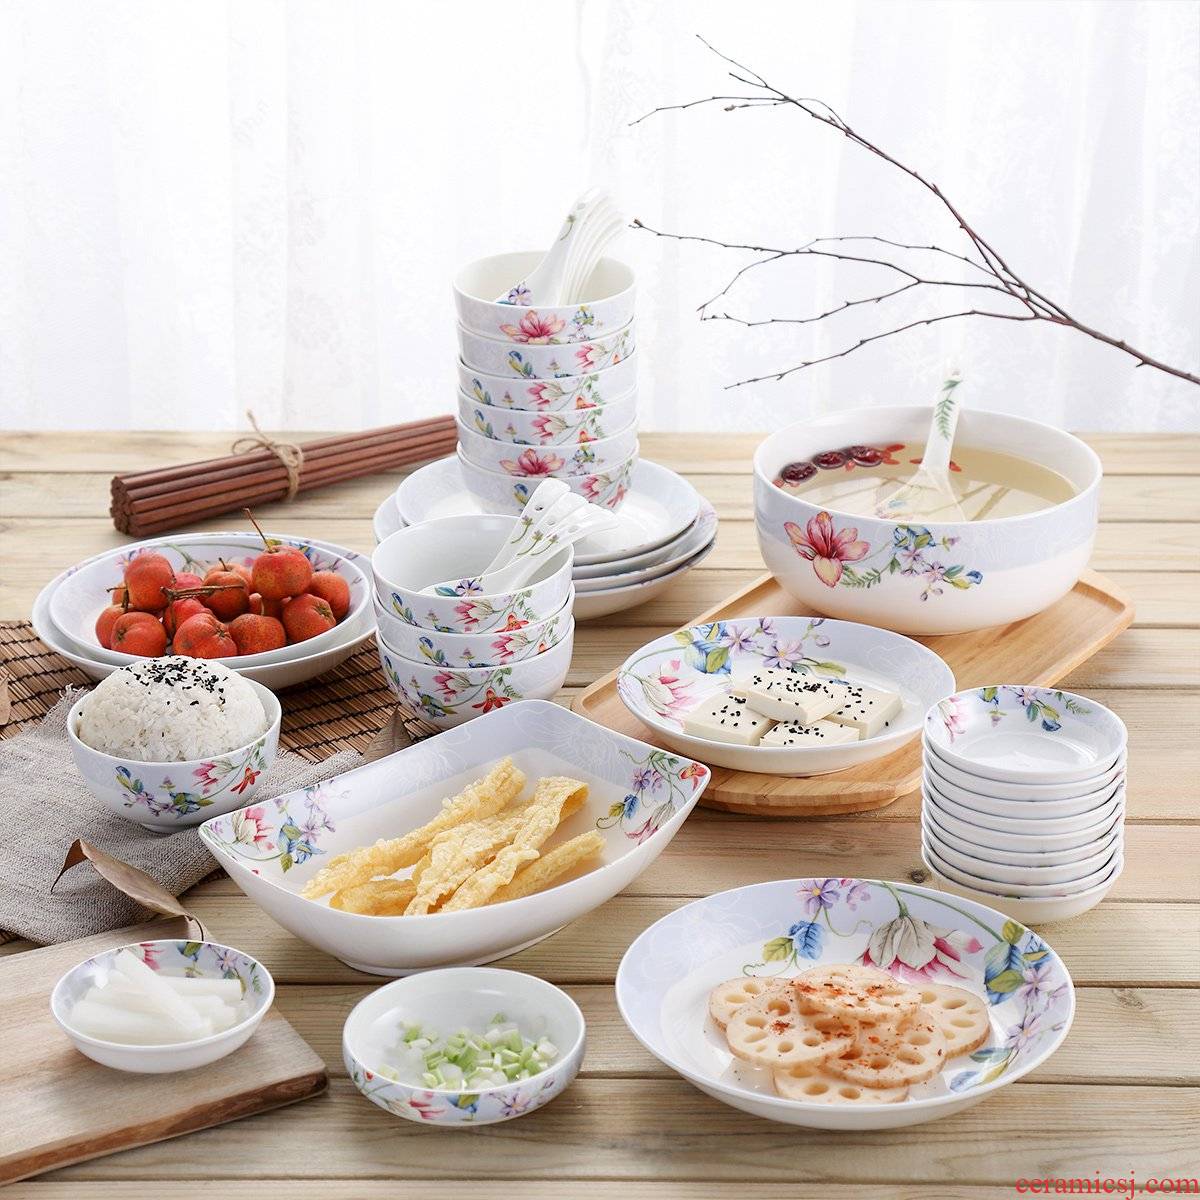 Song of sakura, 52 new ipads China head of household ceramics dishes suit Chinese dishes dishes to eat bread and butter dish dish dish